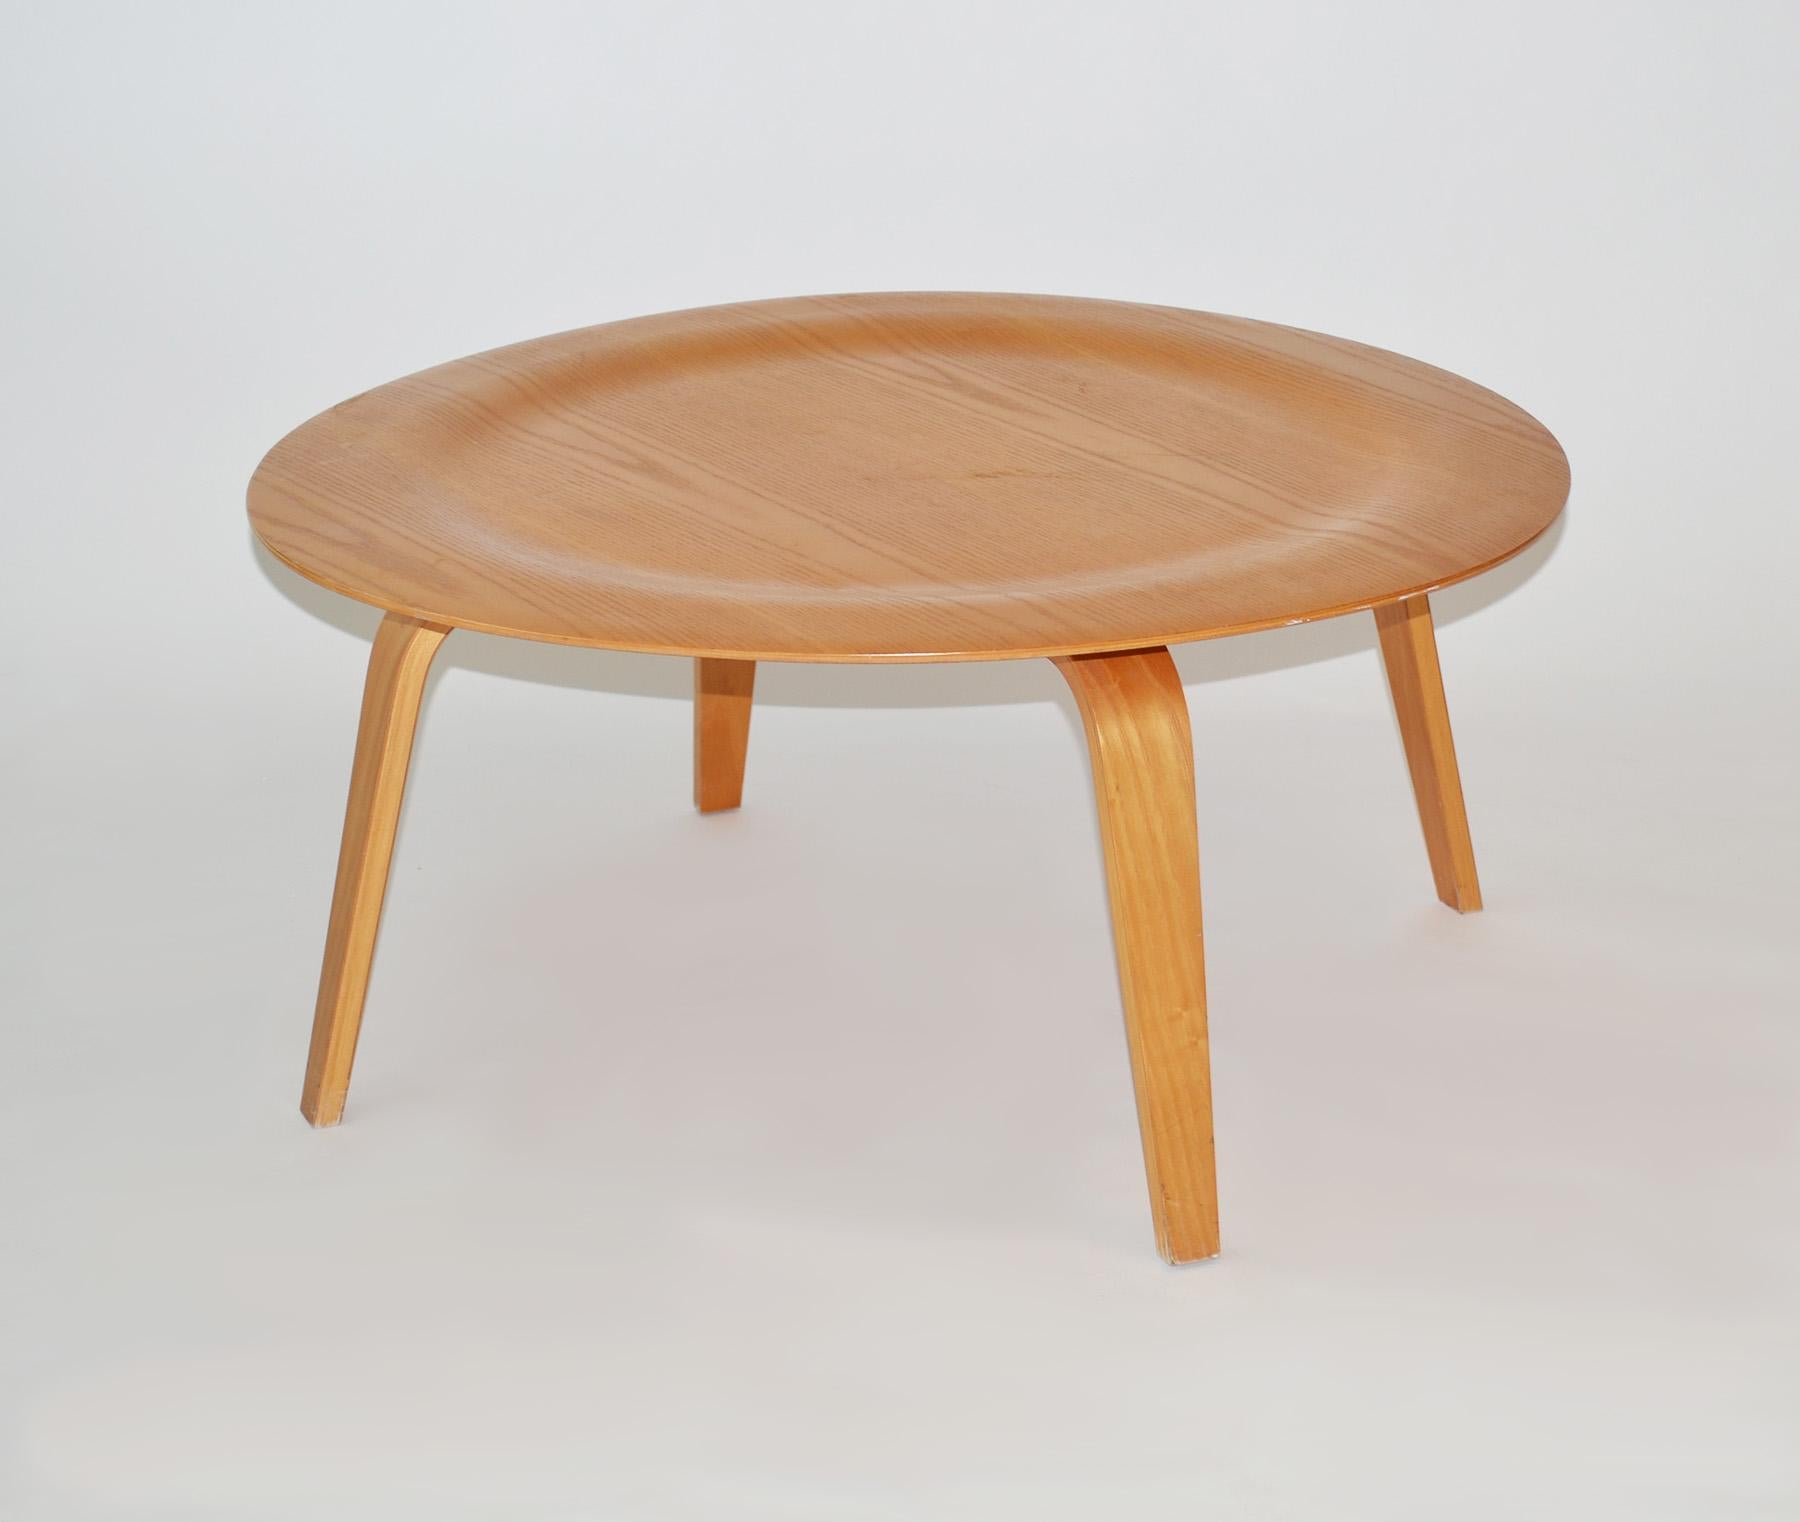 Charles and Ray Eames CTW Coffee Table in Plywood Herman Miller 2000s.
Molded birch plywood classic mid-century design. Early 2000's production.
 